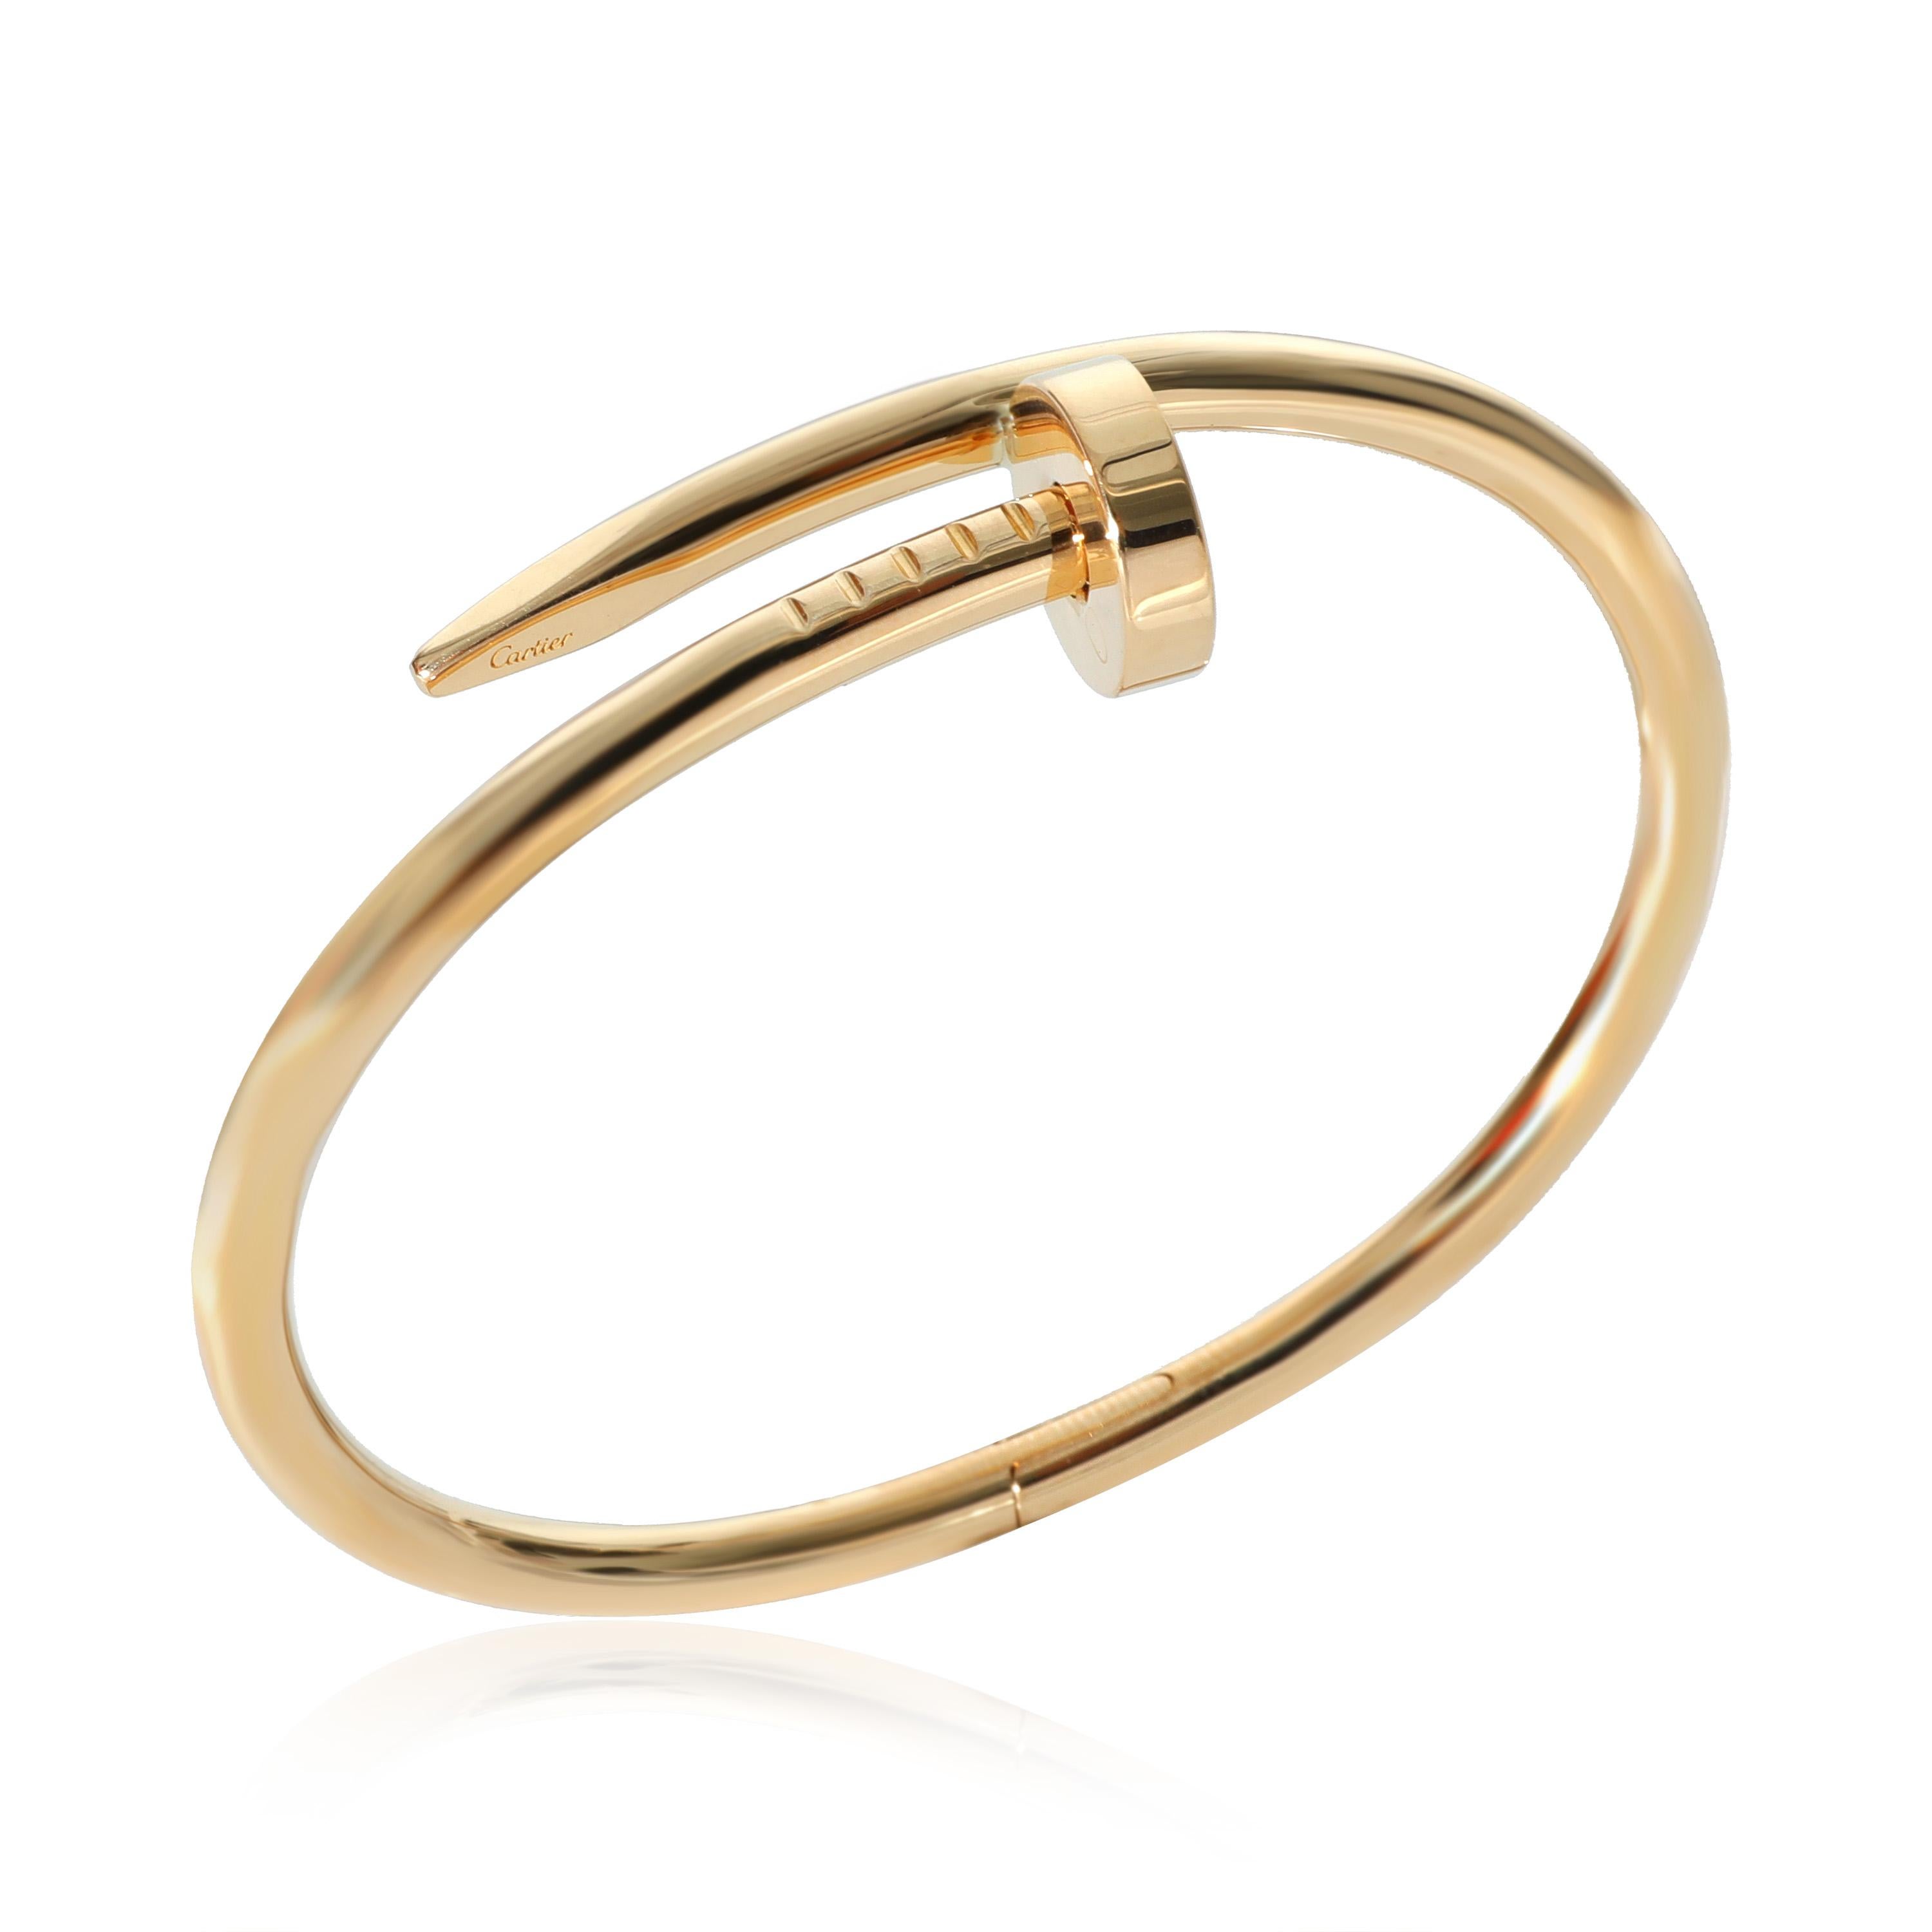 Cartier Juste Un Clou Bracelet in 18k Yellow Gold

PRIMARY DETAILS
SKU: 130518
Listing Title: Cartier Juste Un Clou Bracelet in 18k Yellow Gold
Condition Description: Translating to 'just a nail', the Juste Un Clou collection from Cartier is one of